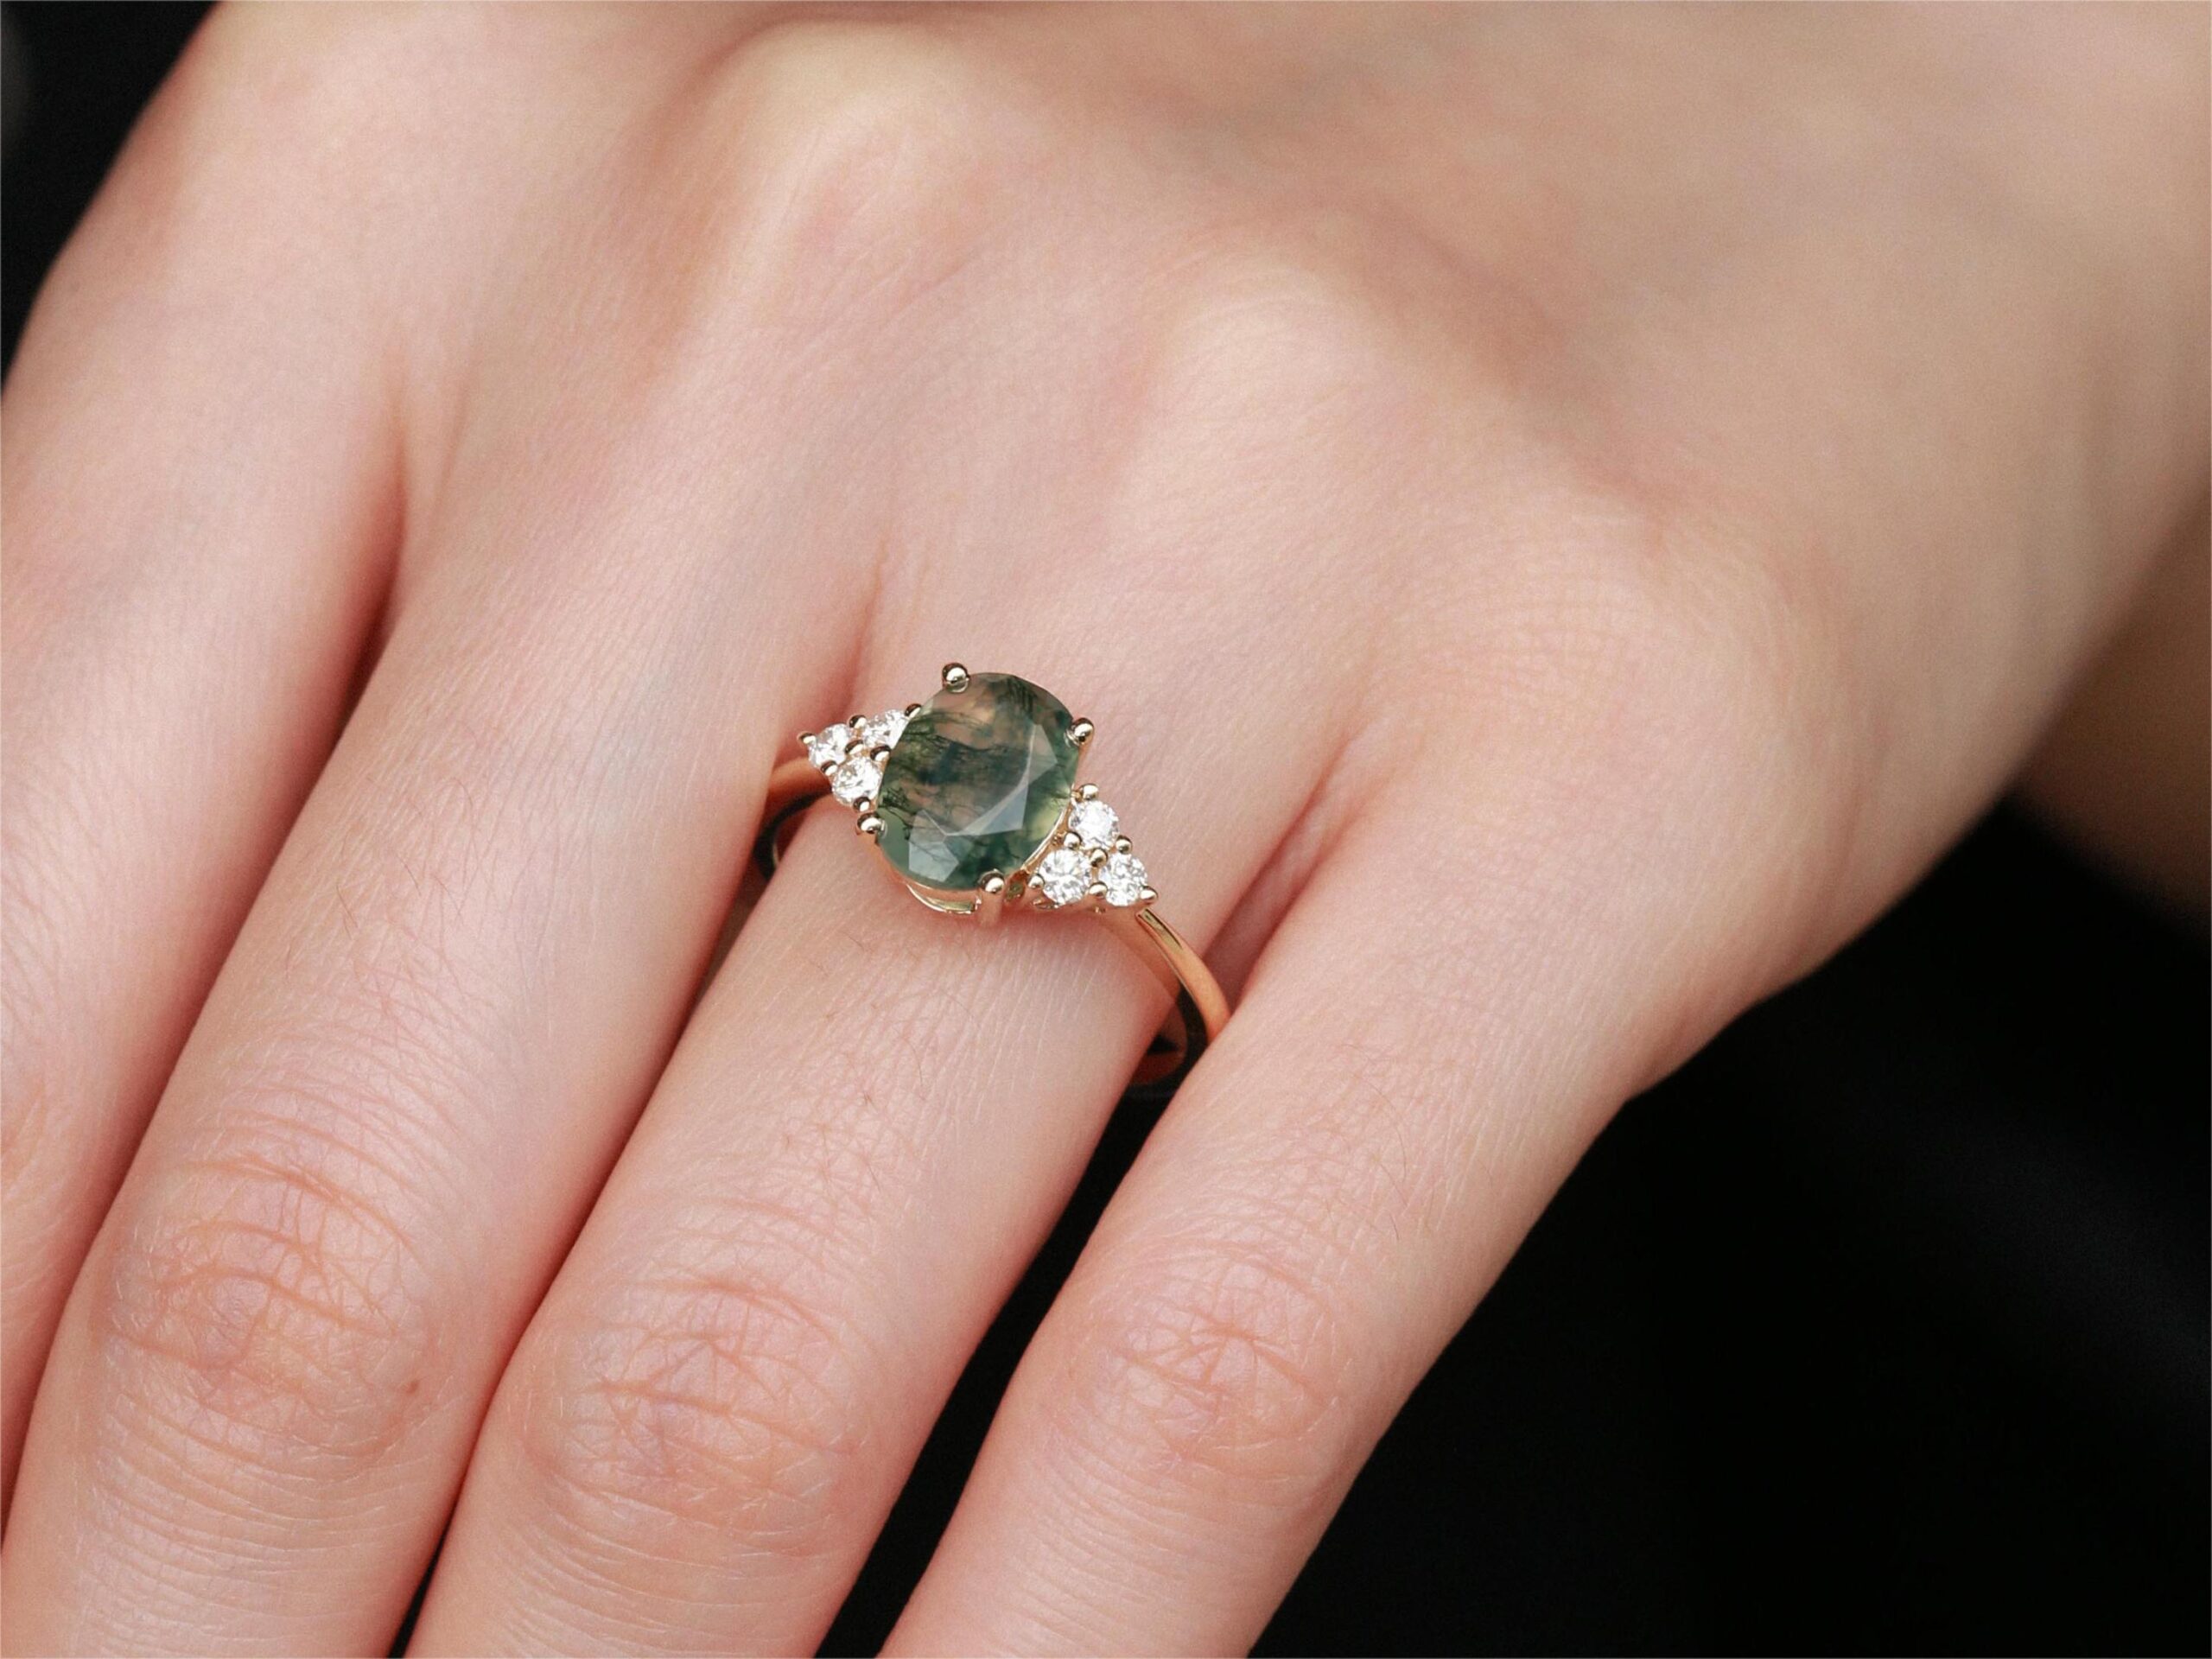 Why Is Moss Agate Growing In Preference For Engagement Rings?